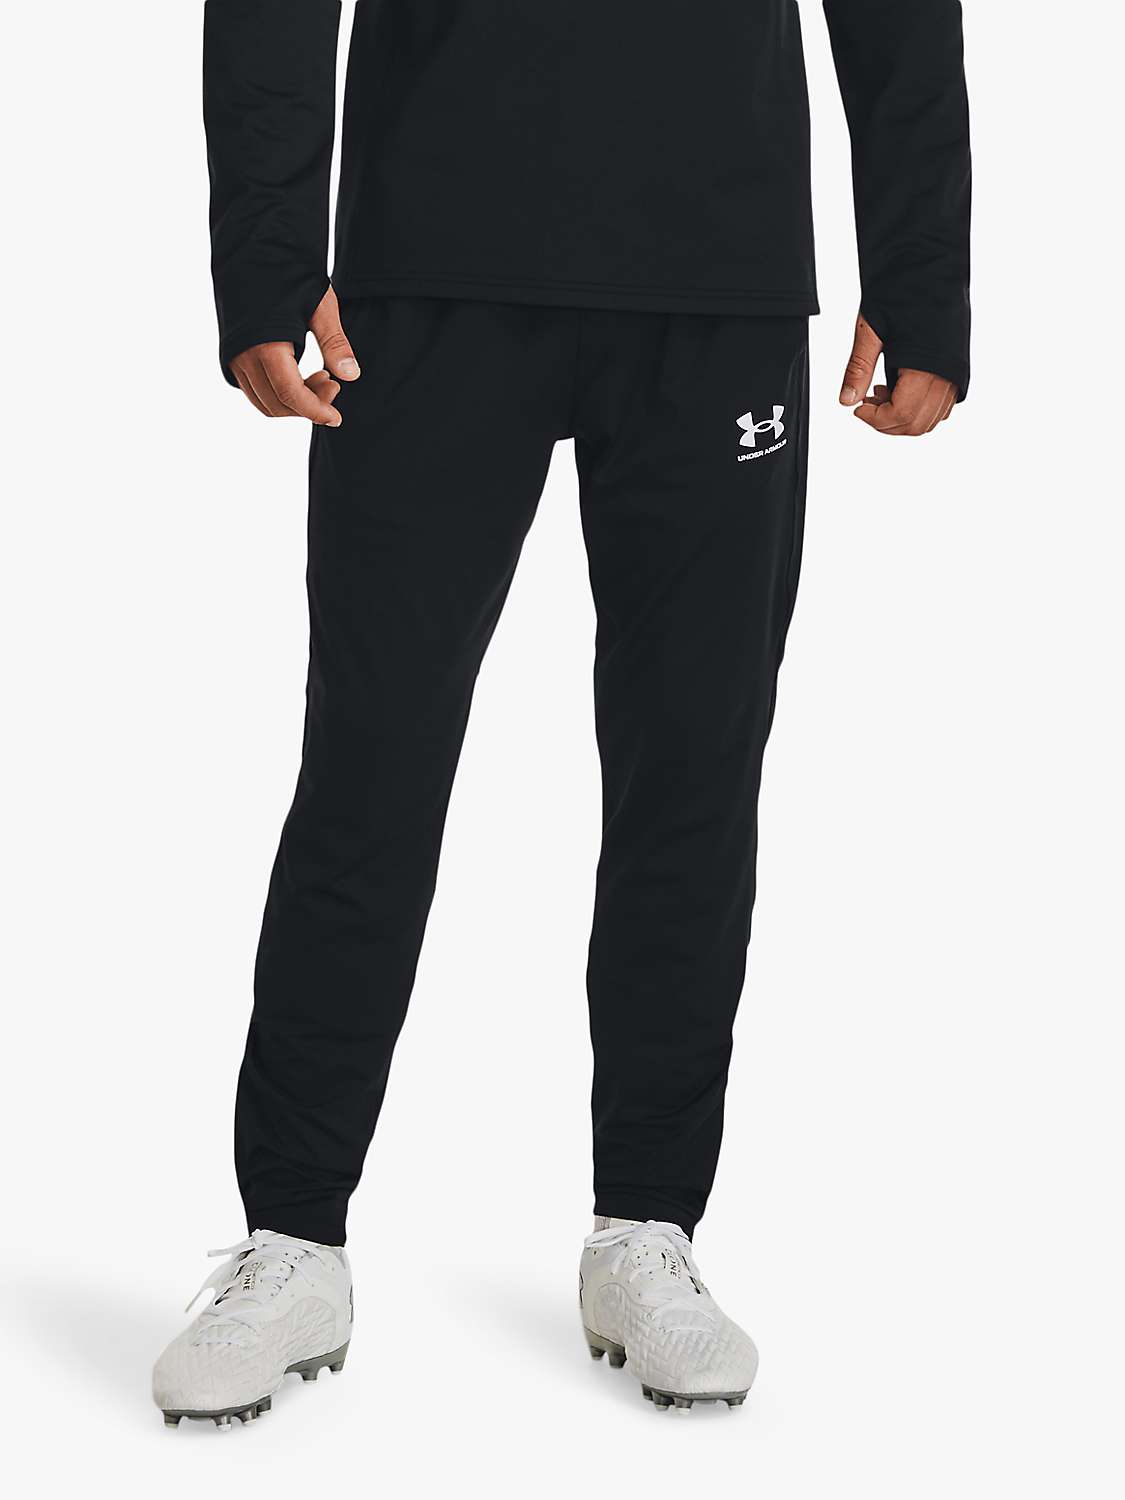 Buy Under Armour Challenger Football Trousers Online at johnlewis.com